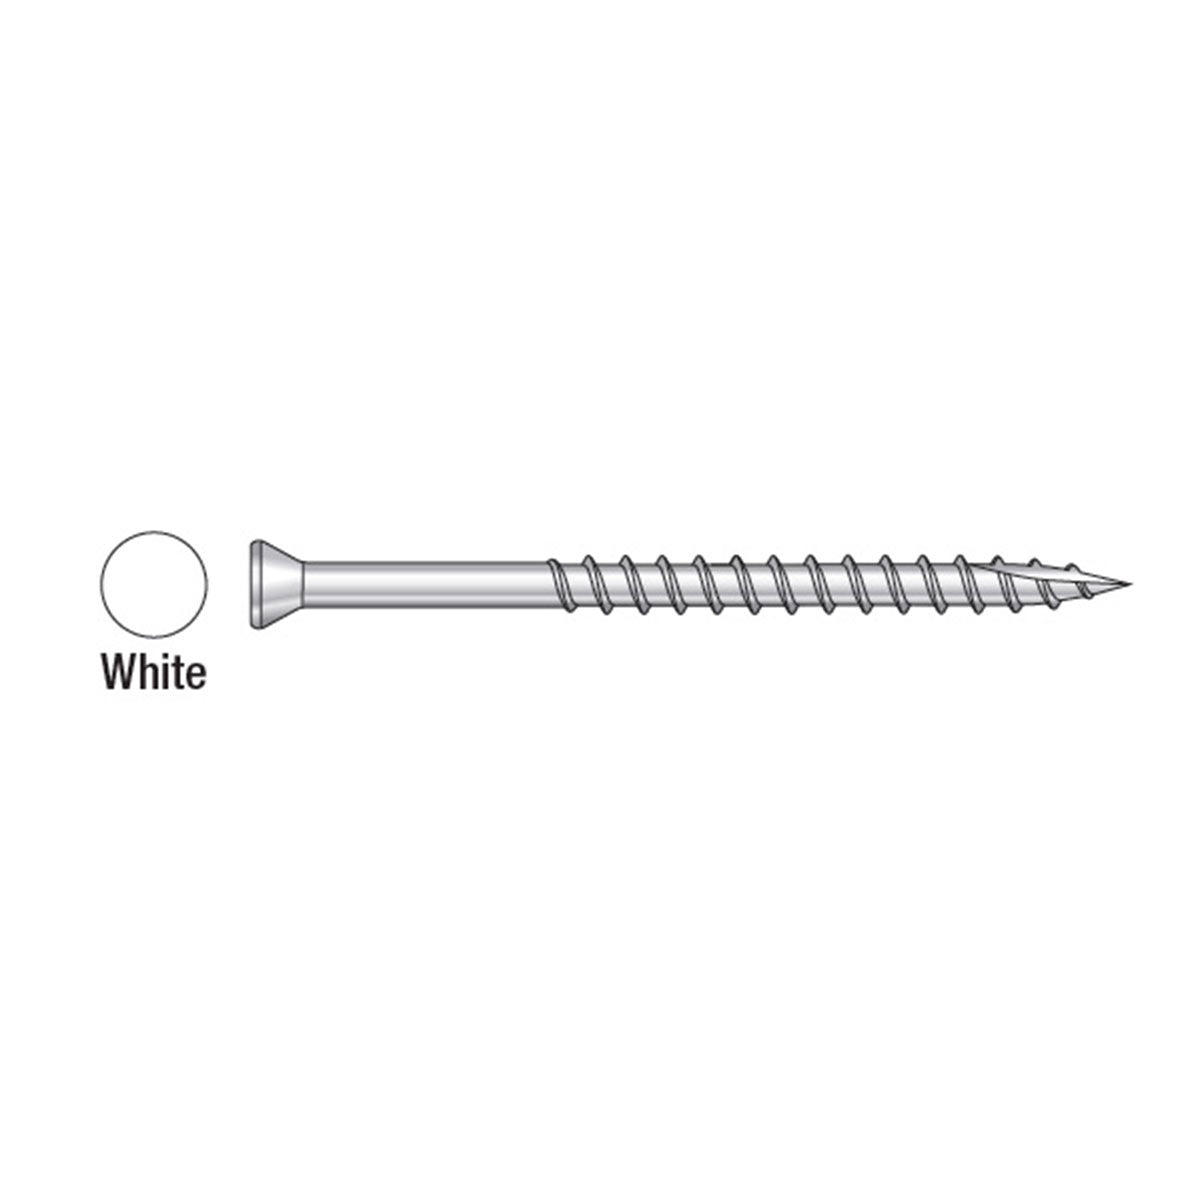 S07162FT1WH05 #7 1-5/8" Type 305 Stainless Steel 6 Lobe Drive Trim Head Screws Painted White - 5 Pound Box